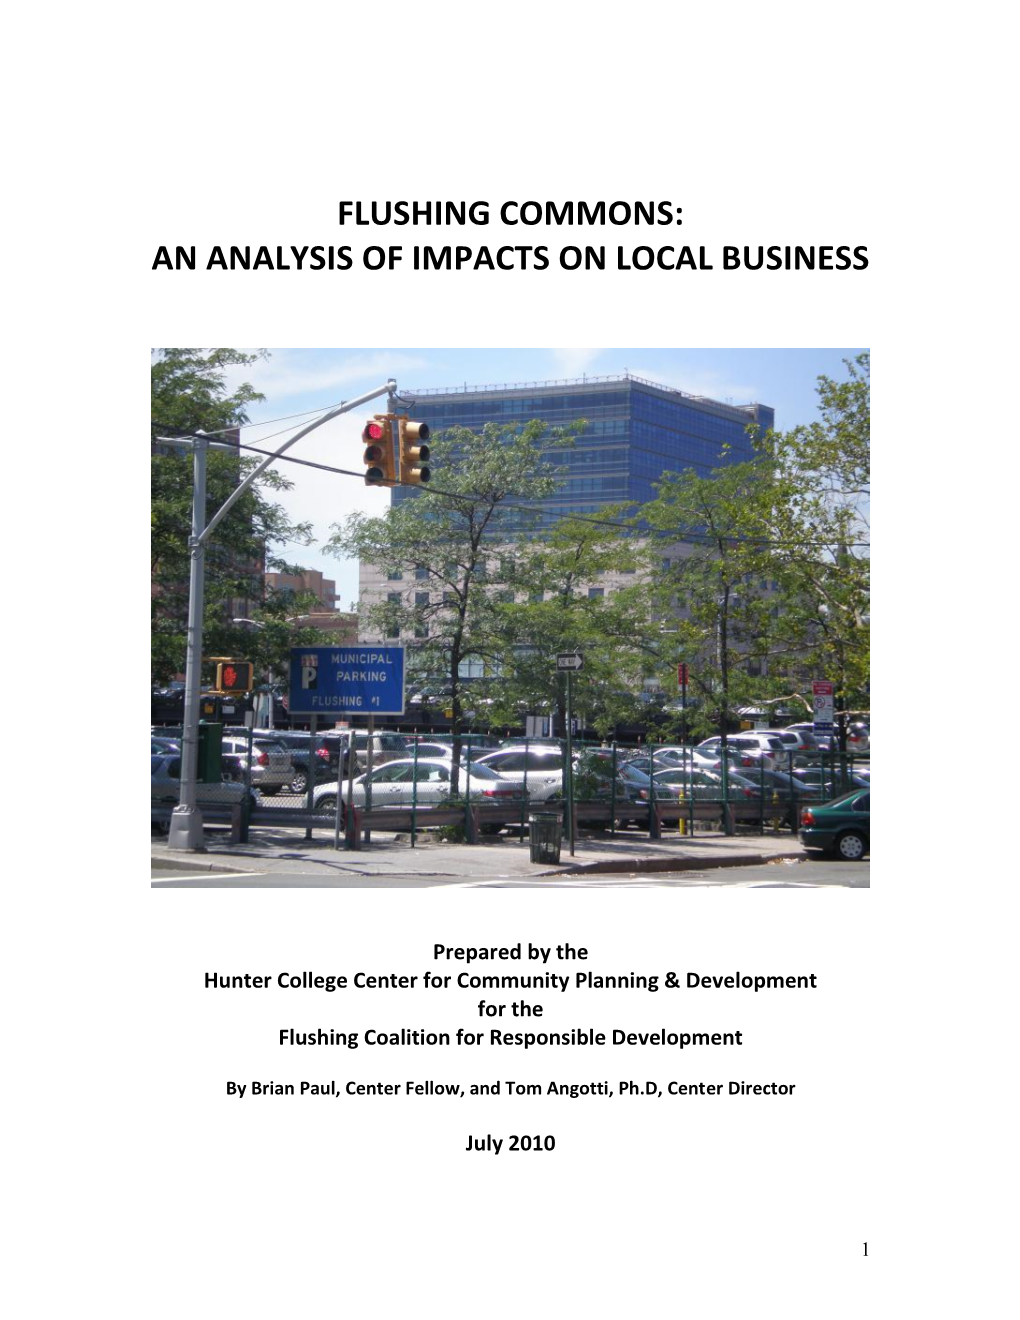 Flushing Commons -- an Analysis of Impacts on Local Business